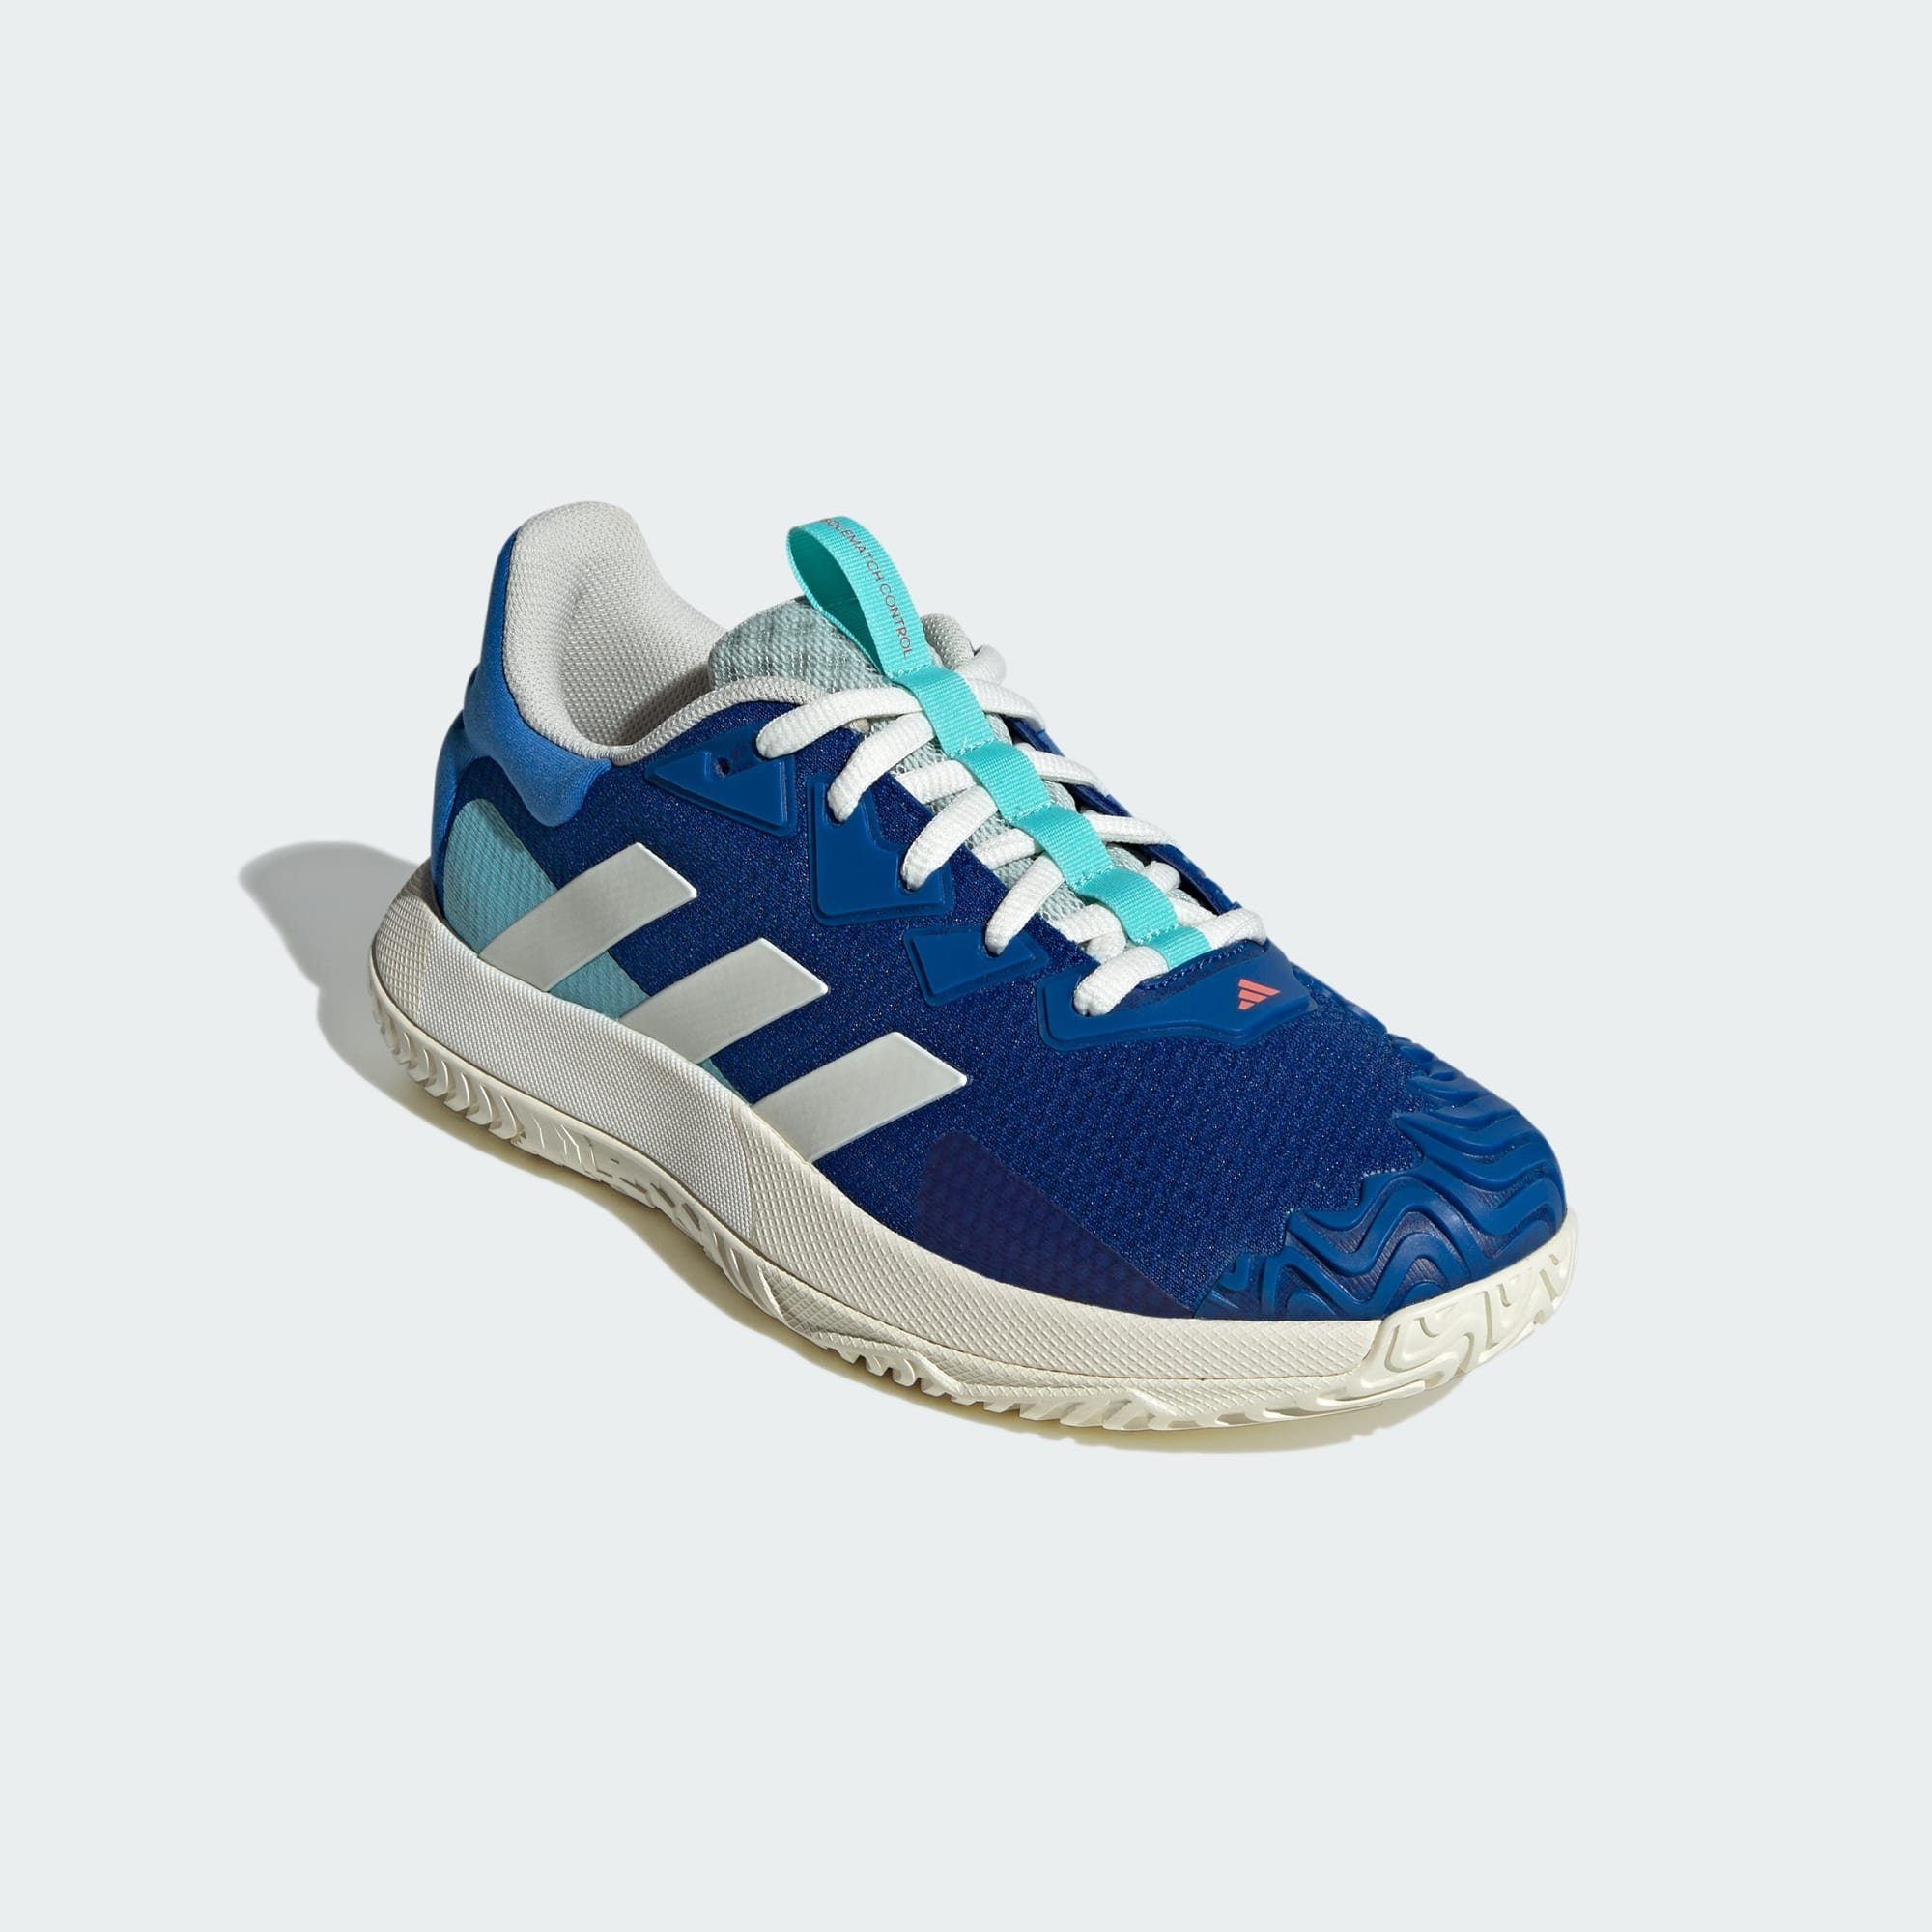 White SOLEMATCH Royal adidas / Blue TENNISSCHUH Performance CONTROL Bright Indoorschuh Royal Off /